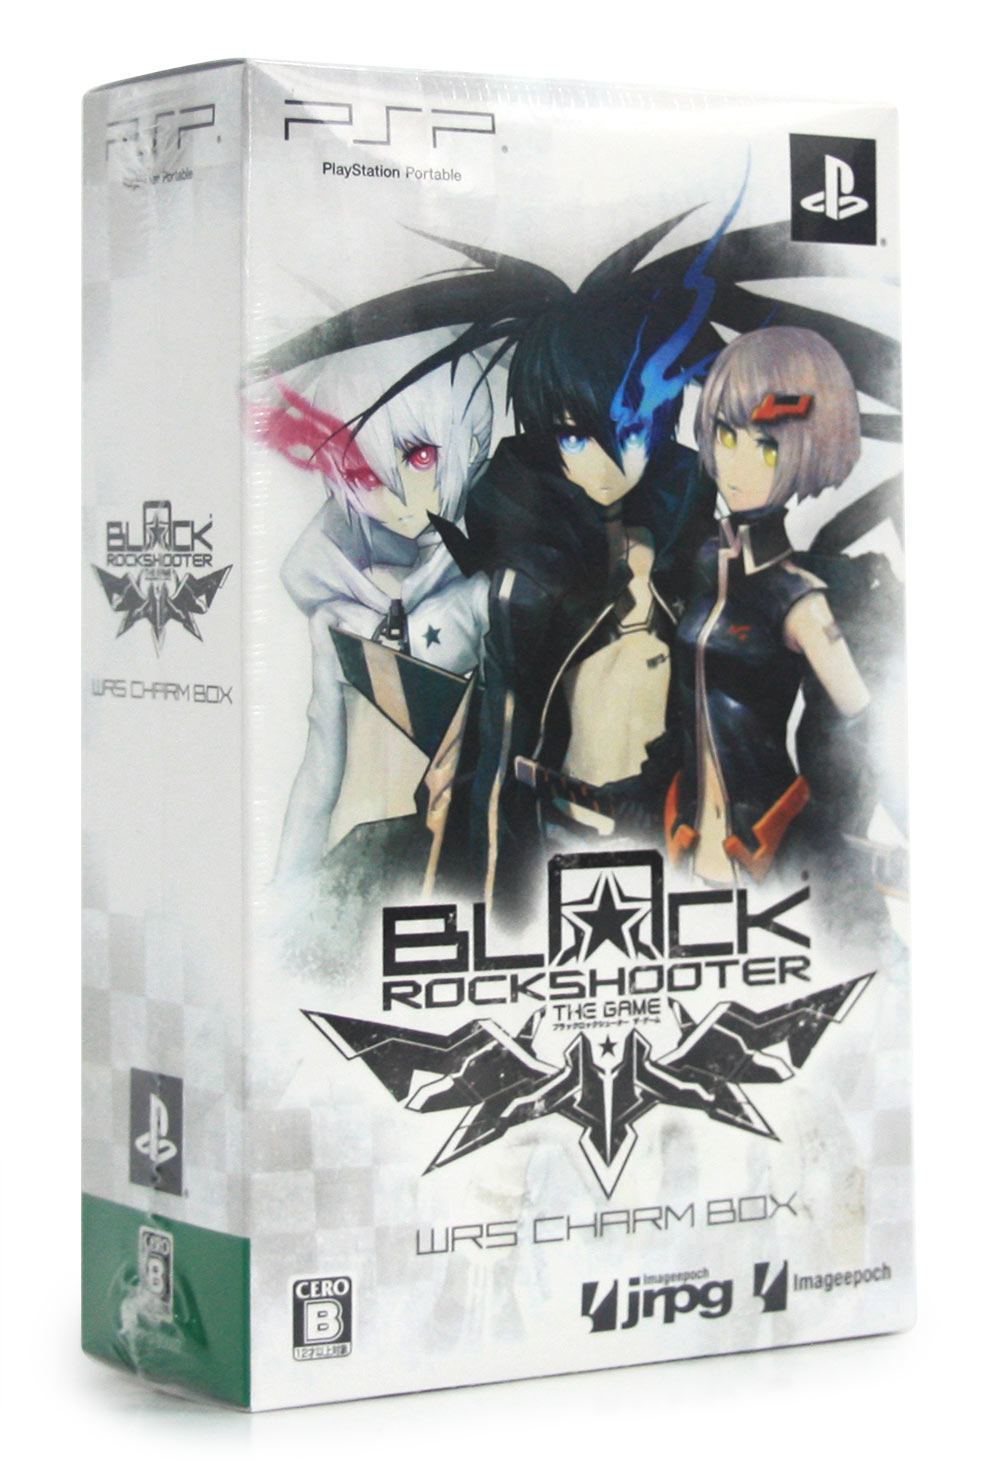 Black * Rock Shooter: The Game [First Print Limited Edition WRS Charm Box]  for Sony PSP